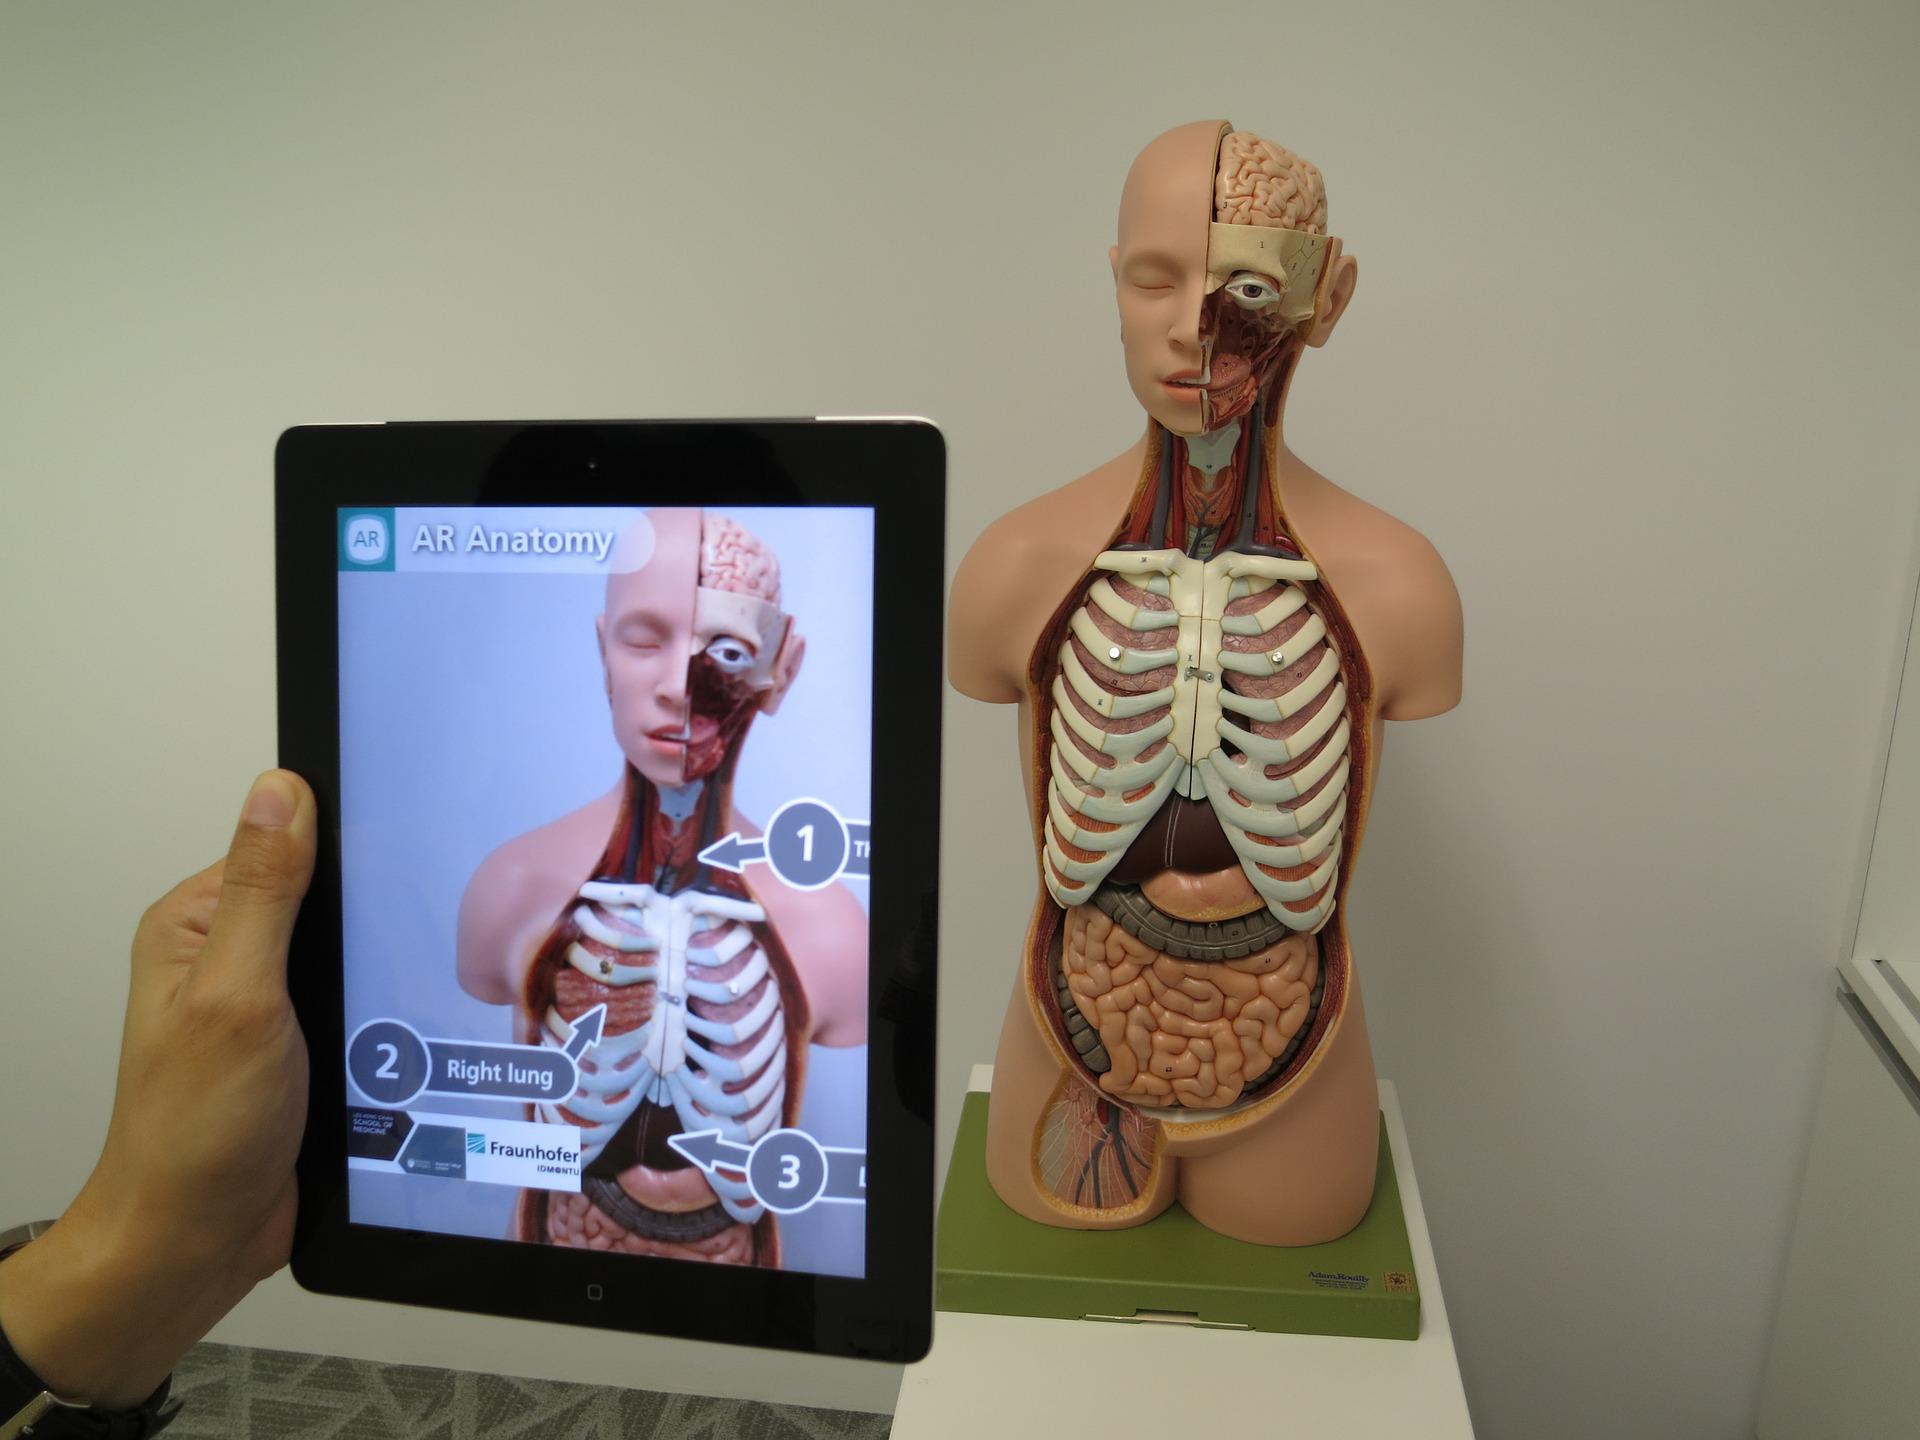 Tablet being pointed at a model of the human body. Tablet screen shows the model along with additional data elements.